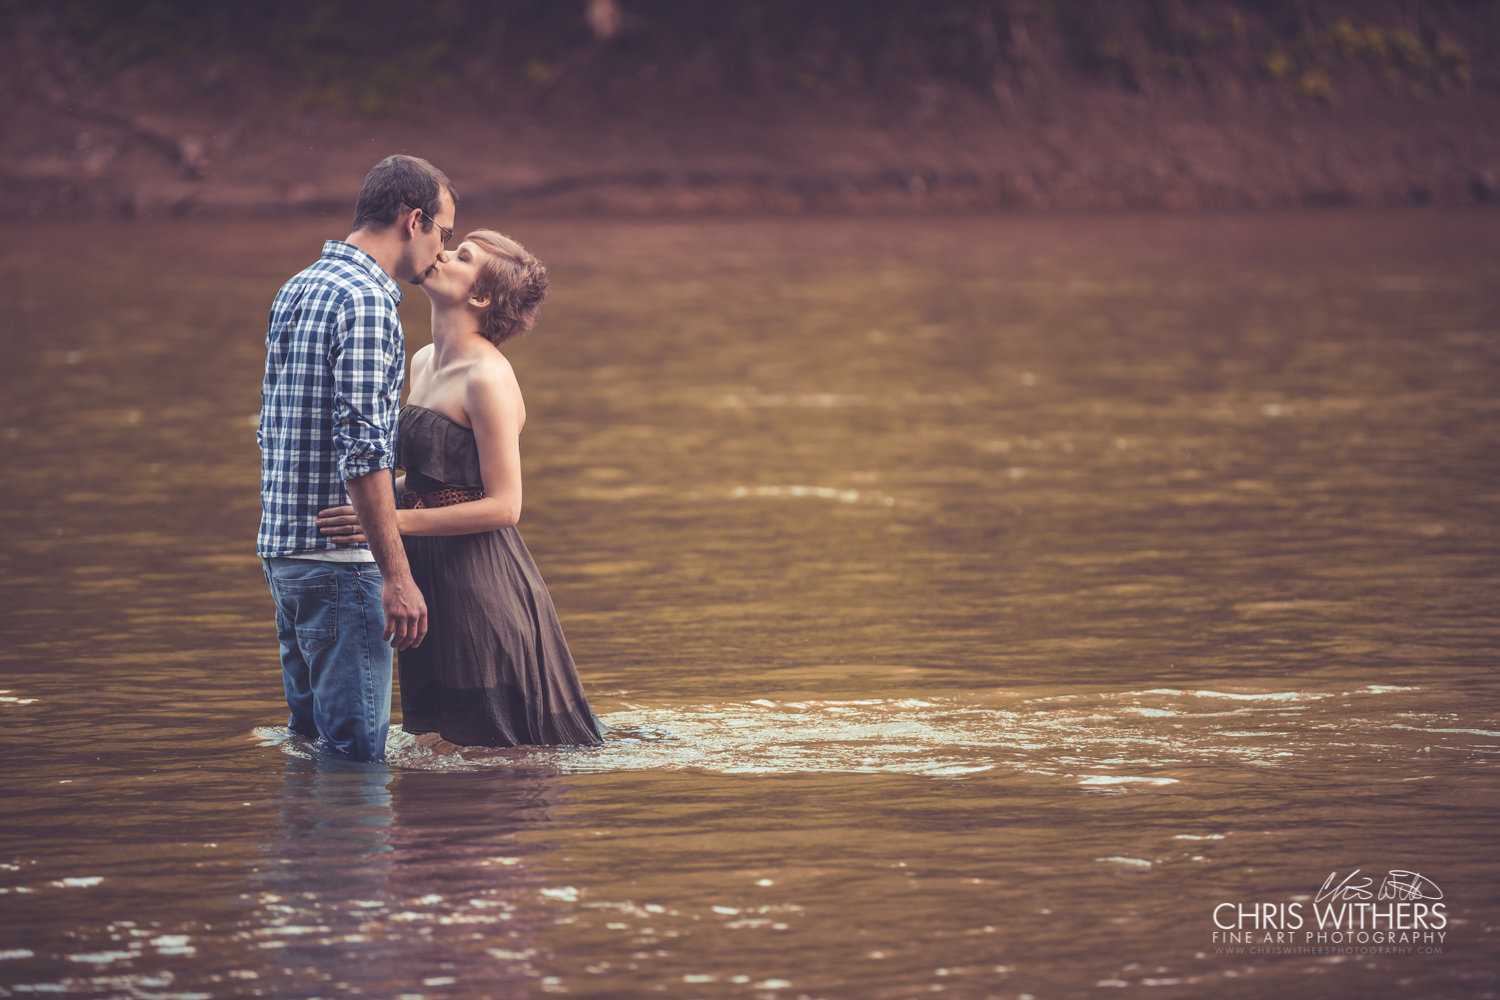 Chris Withers Photography - Springfield, IL Photographer-531